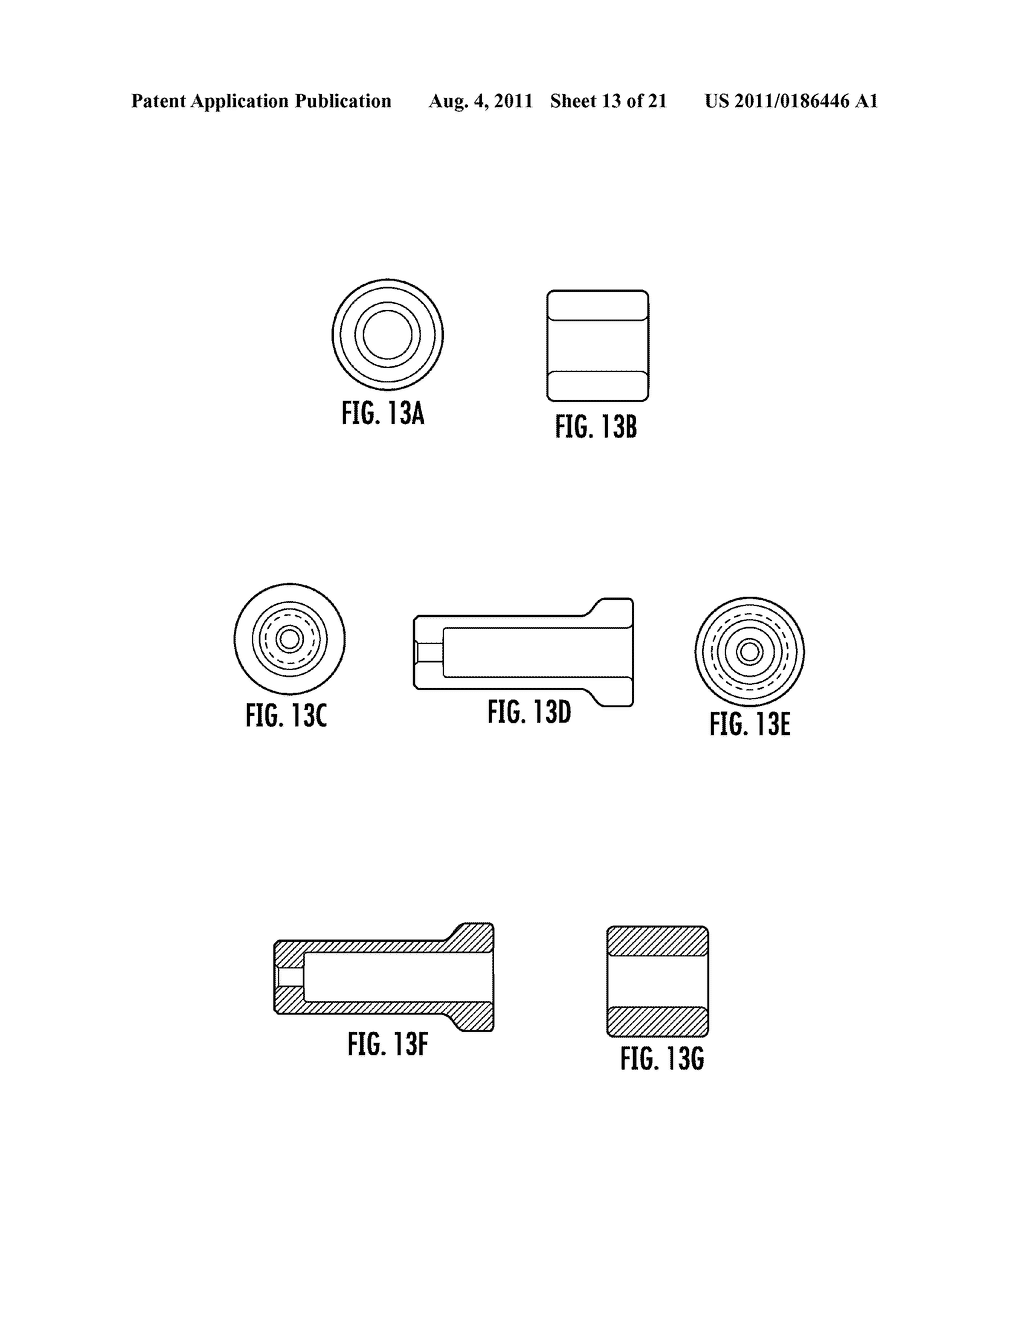 Method for Producing a Subminiature 